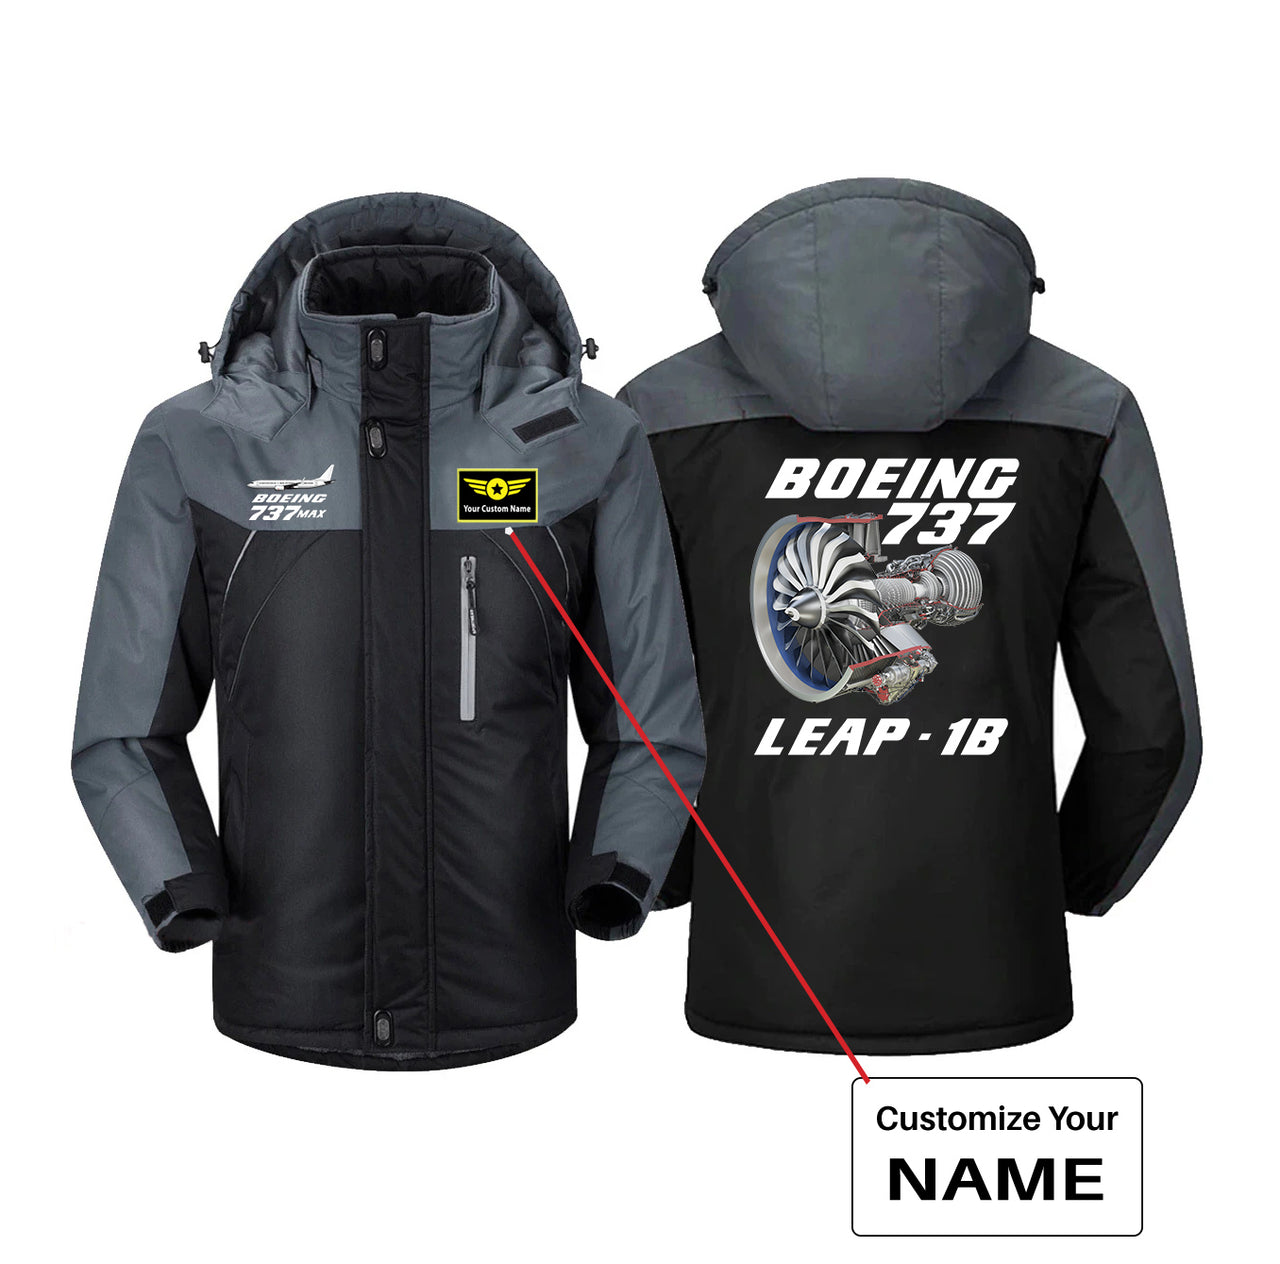 Boeing 737 & Leap 1B Designed Thick Winter Jackets